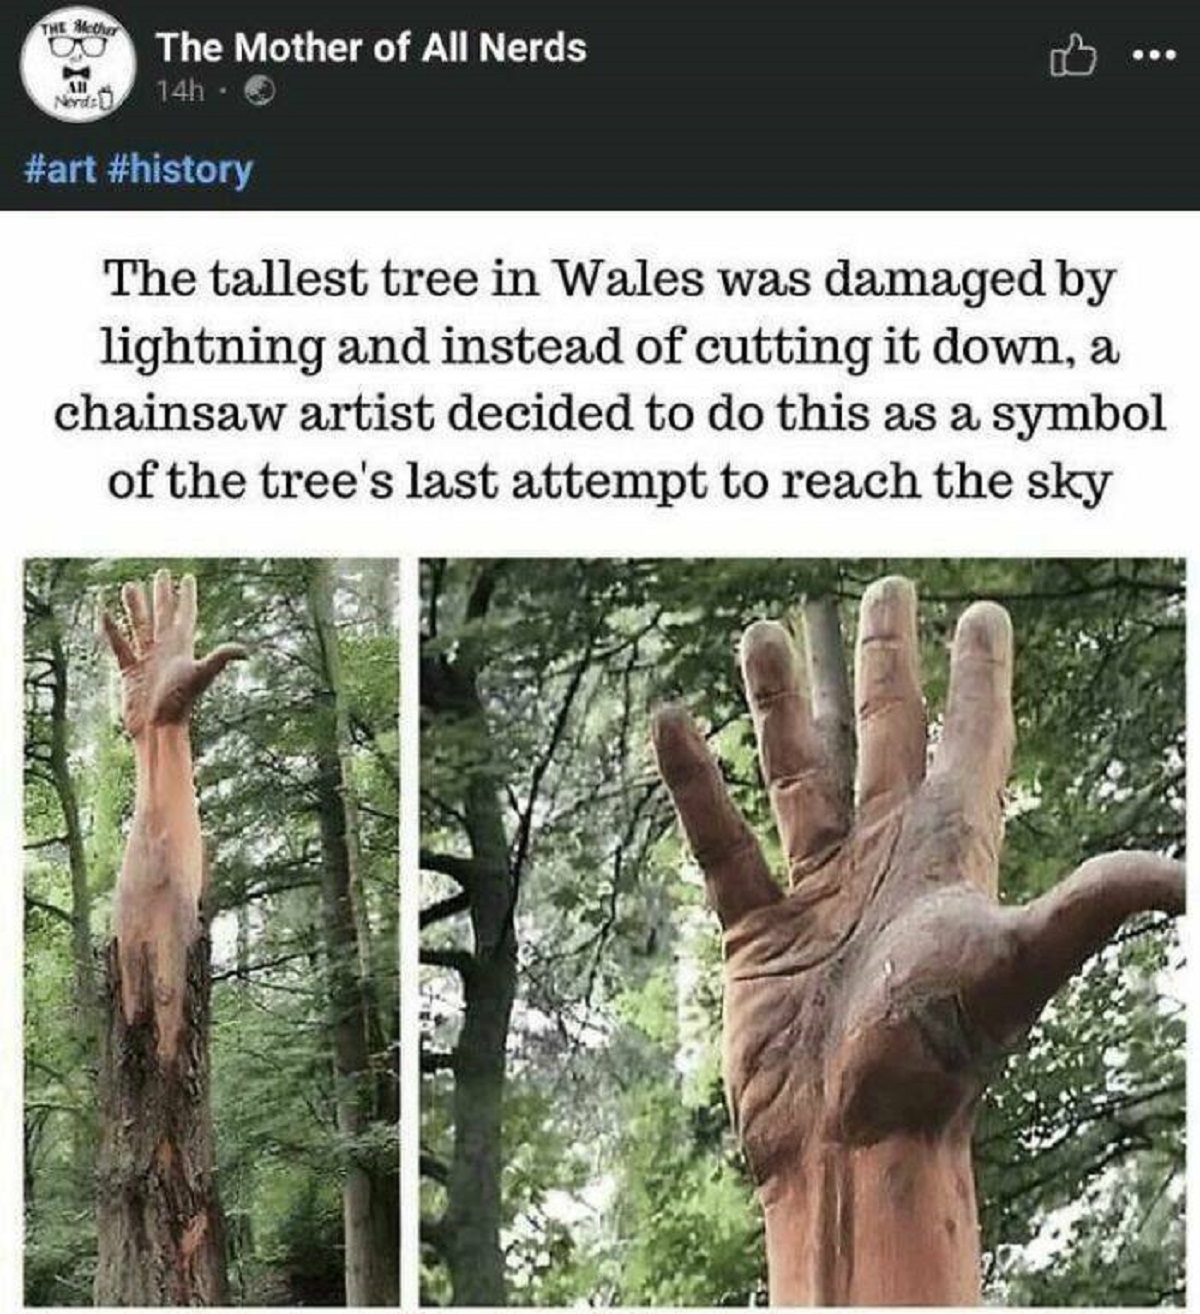 tree struck by lightning hand - The Mother of All Nerds 14h D The tallest tree in Wales was damaged by lightning and instead of cutting it down, a chainsaw artist decided to do this as a symbol of the tree's last attempt to reach the sky